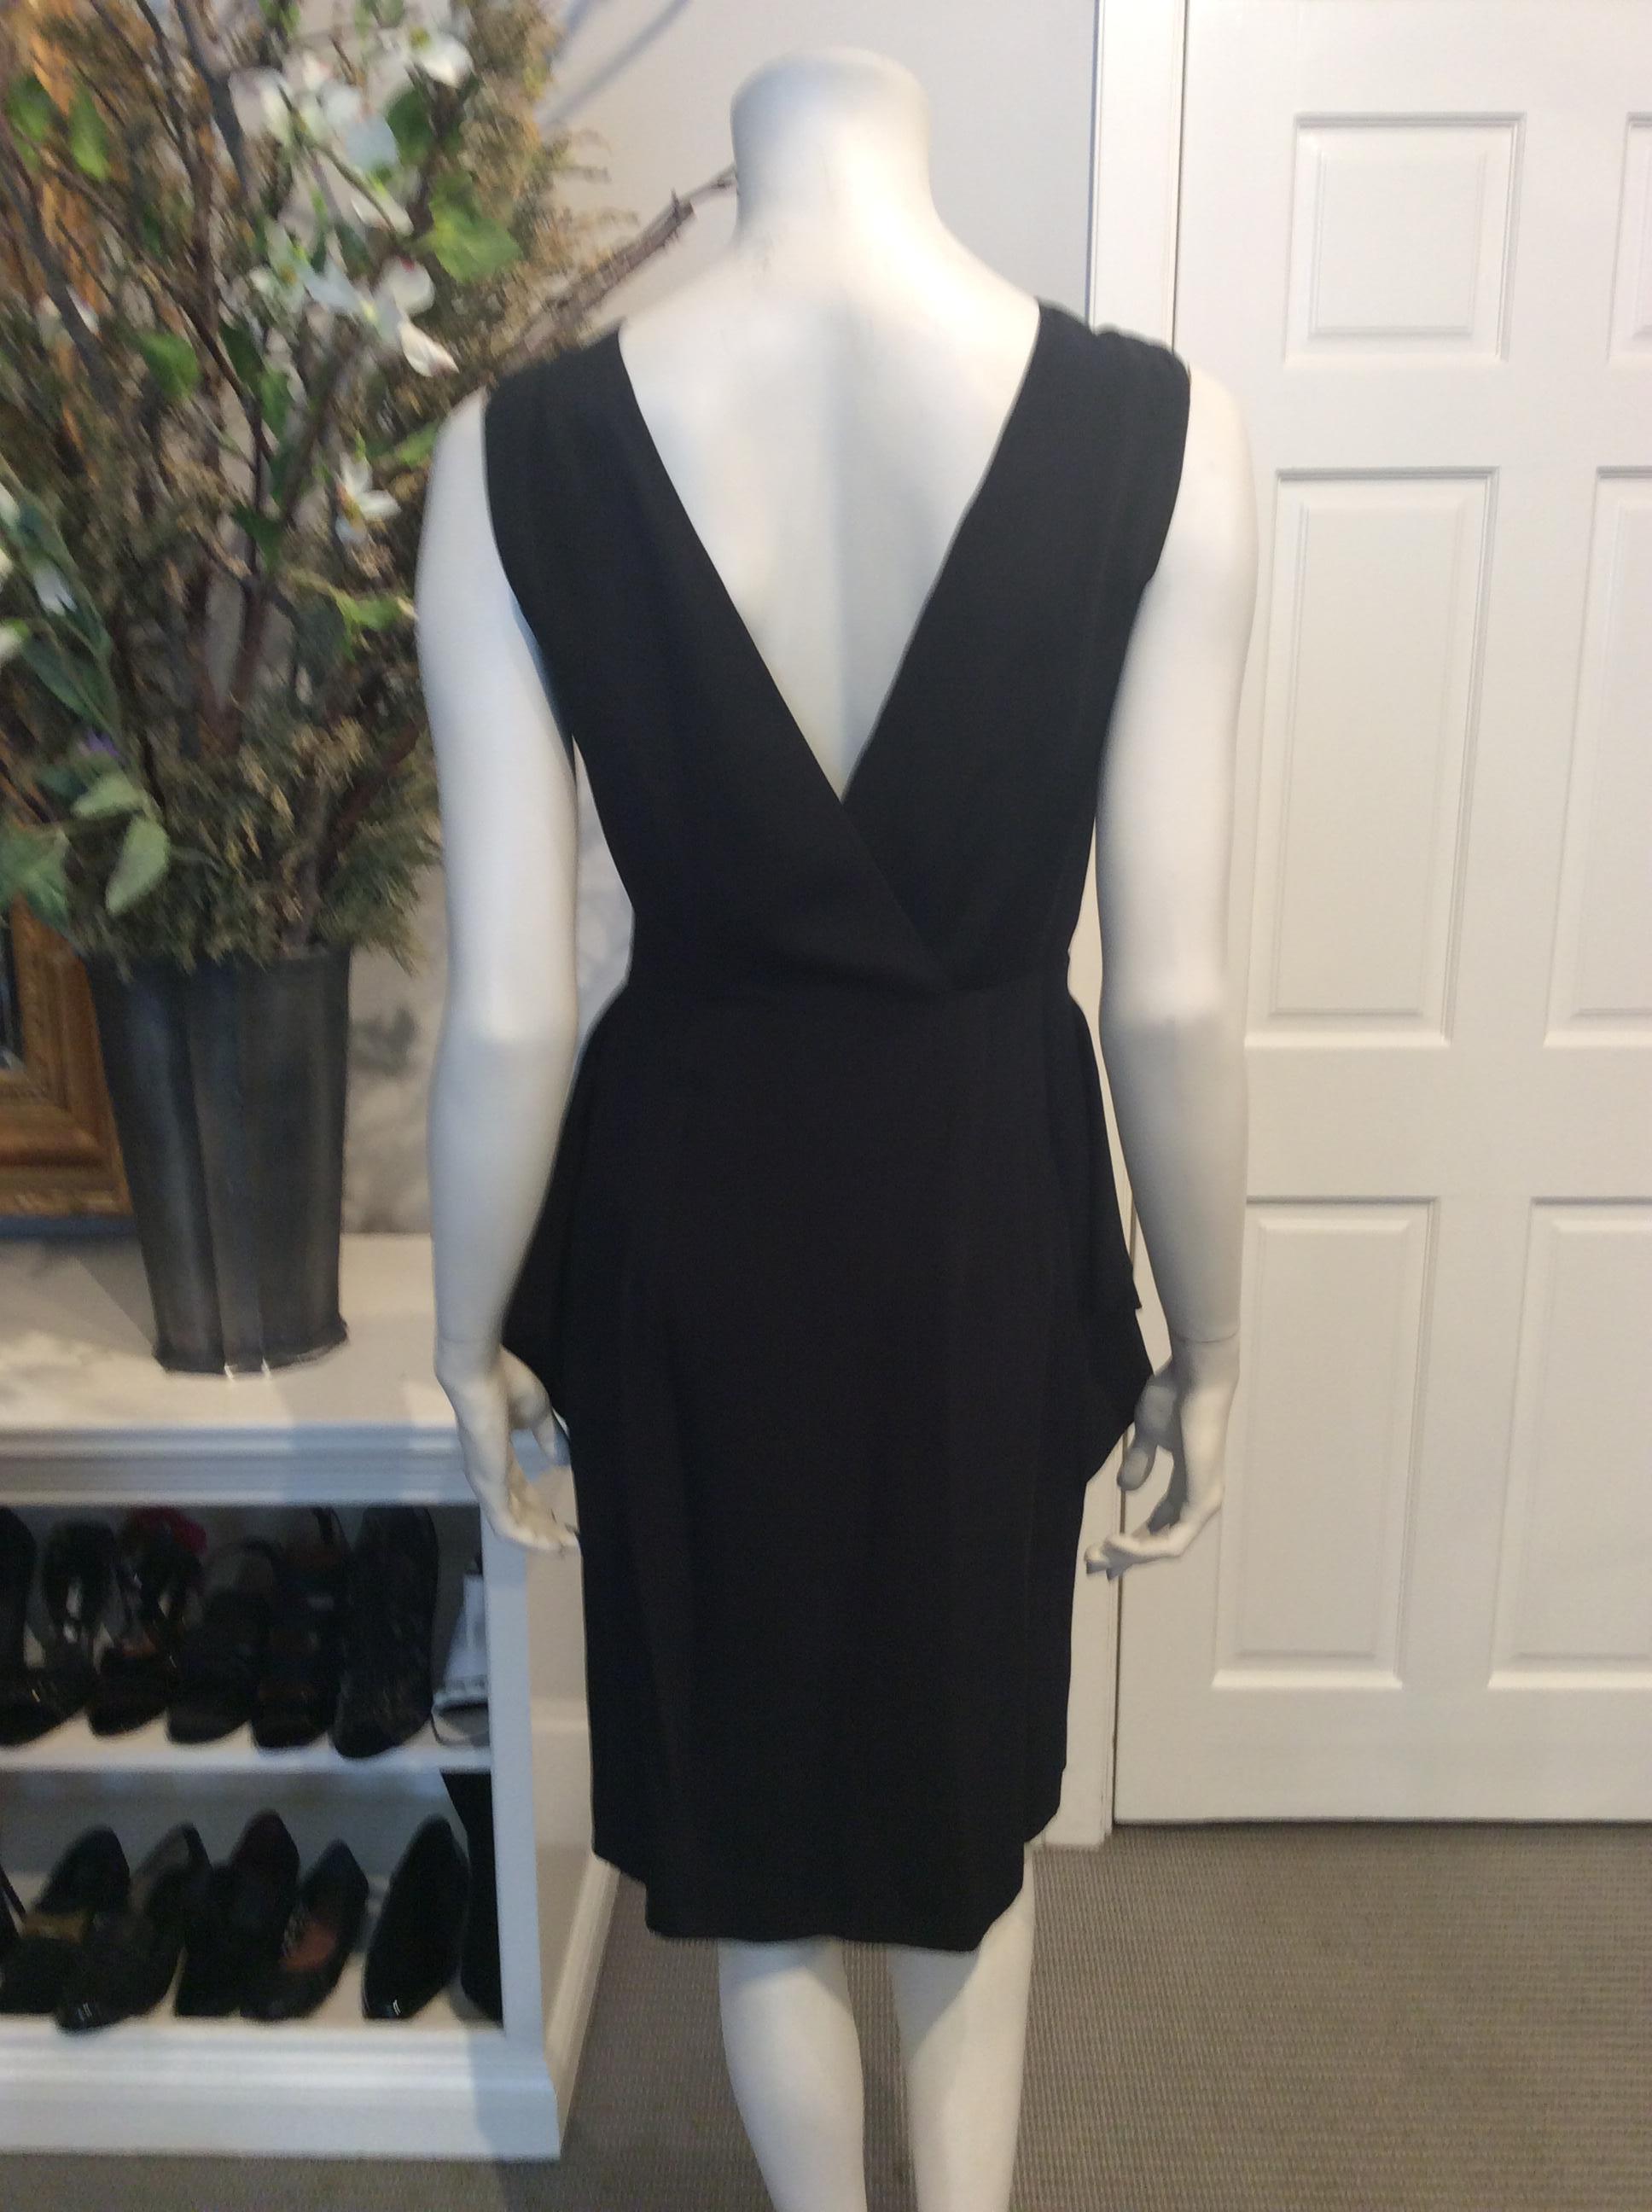 New Prada Black Silk Dress with Draping at Hips and Front Pleating Sz 42/Us6 For Sale 1